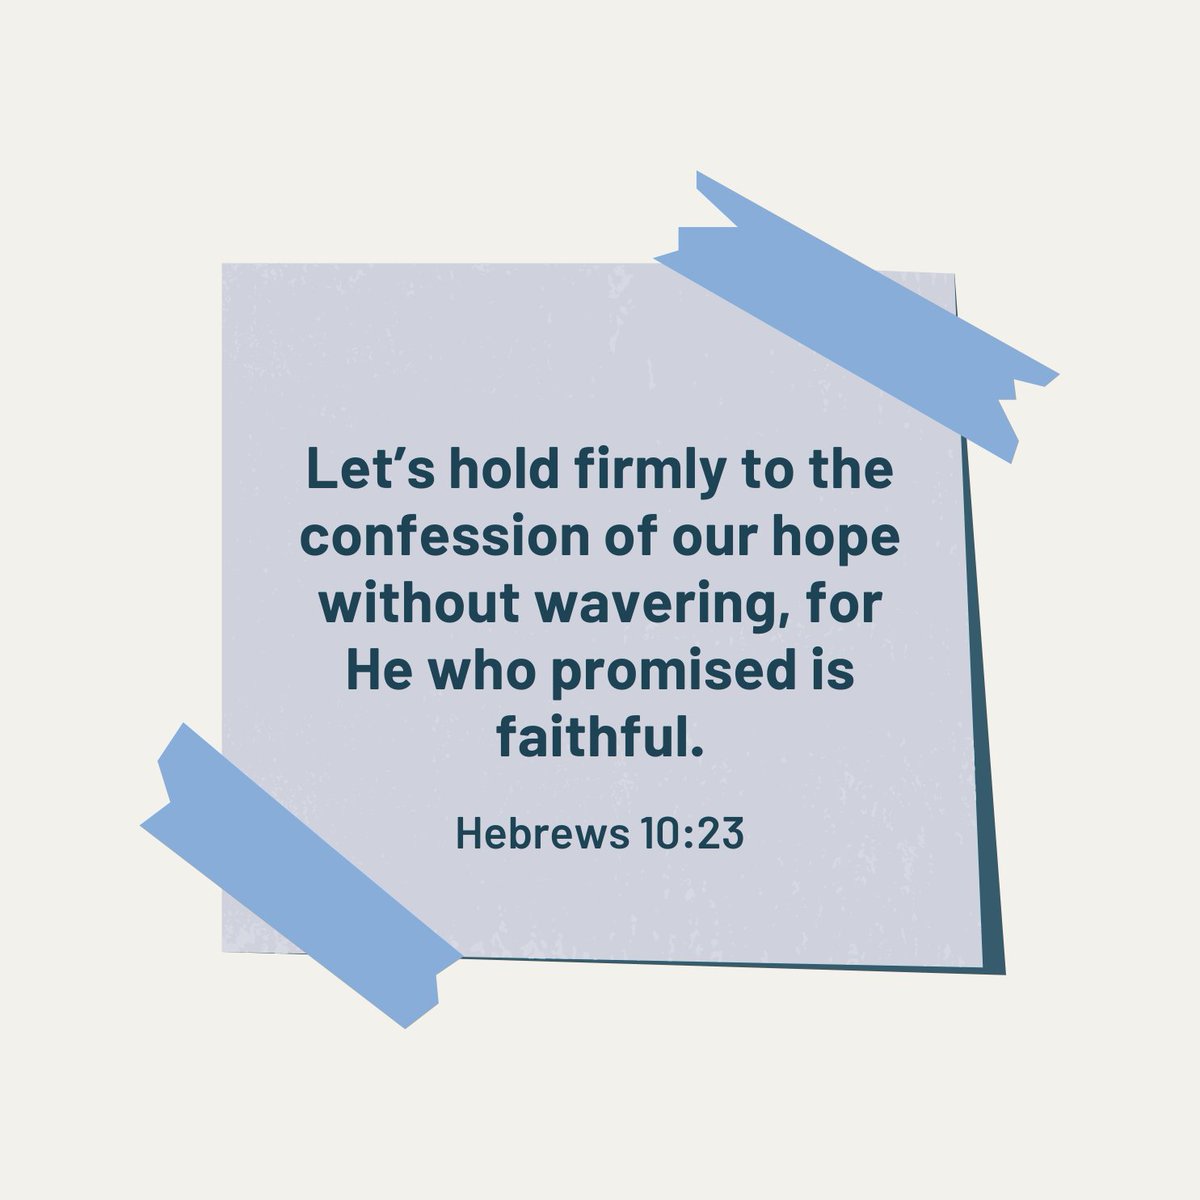 Let us hold unswervingly to the hope we profess, for he who promised is faithful. 🙏✨ 
-
Share this verse to your story to encourage your friends!
-
#Hebrews10v23 #FaithfulPromise #HoldOnToHope #TrustInHim #BibleVerseOfTheDay #ChristianLiving #DailyFaith